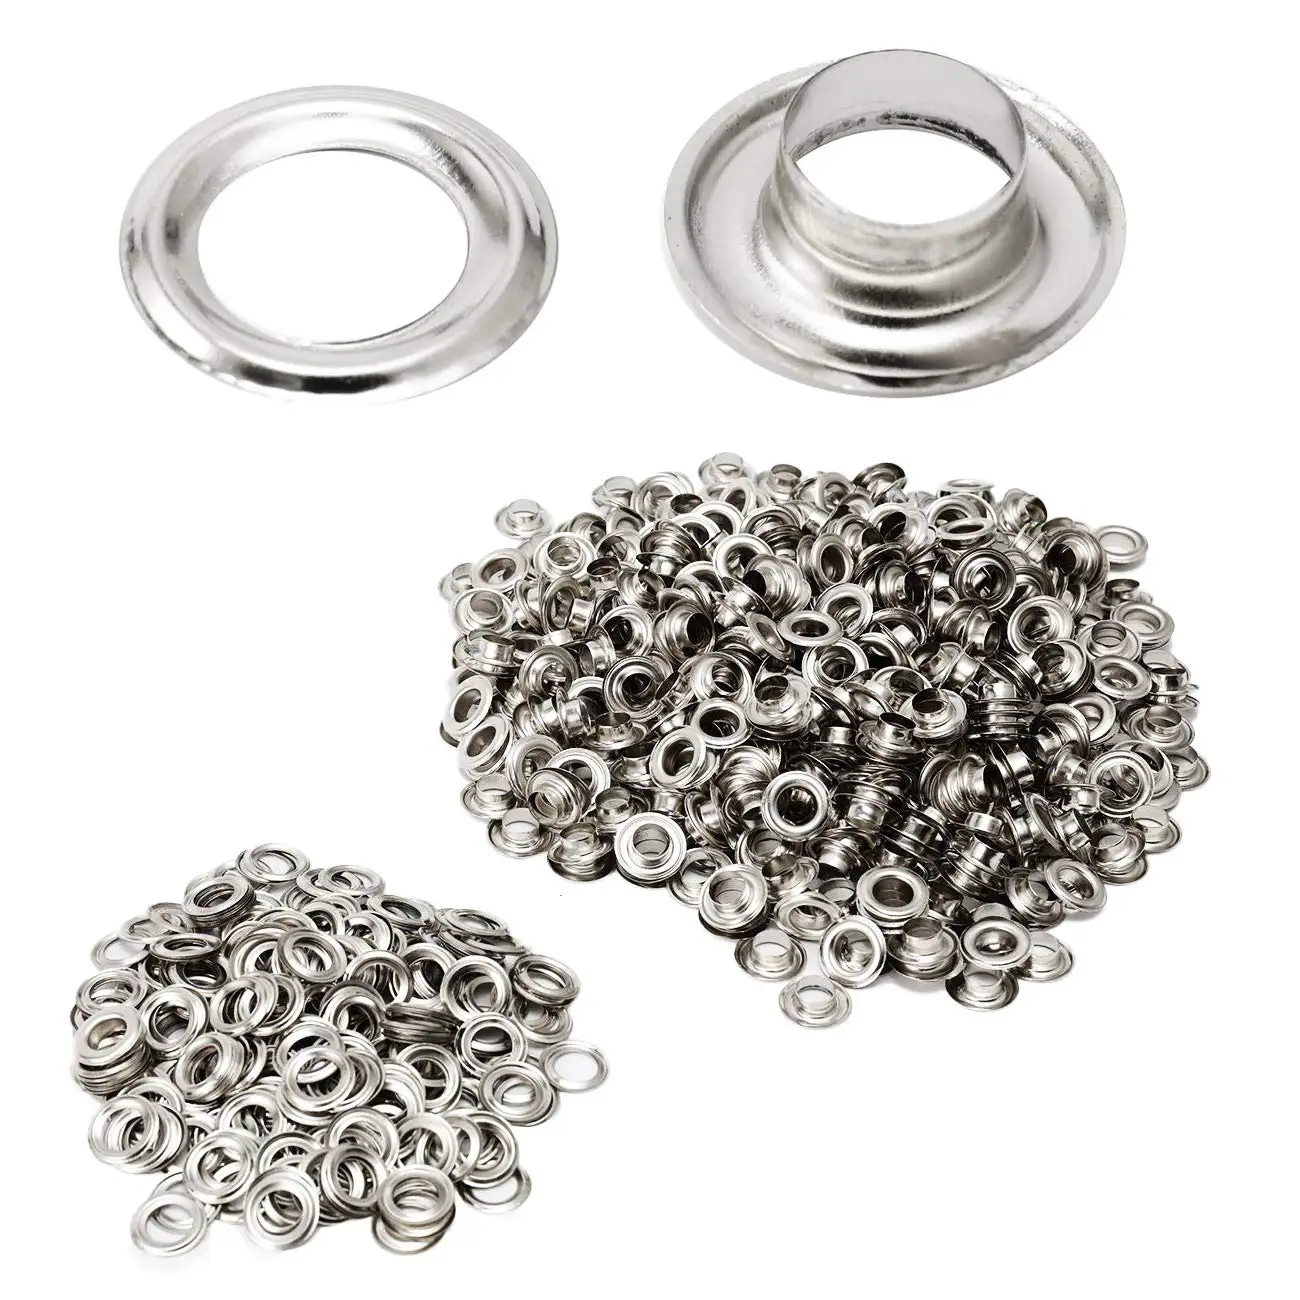 

1000pcs Grommet Kit Metal Eyelets 8mm 10mm 12mm 14mm 17mm With Washer For Curtains Leather Canvas Belt Silver Gold Accessories